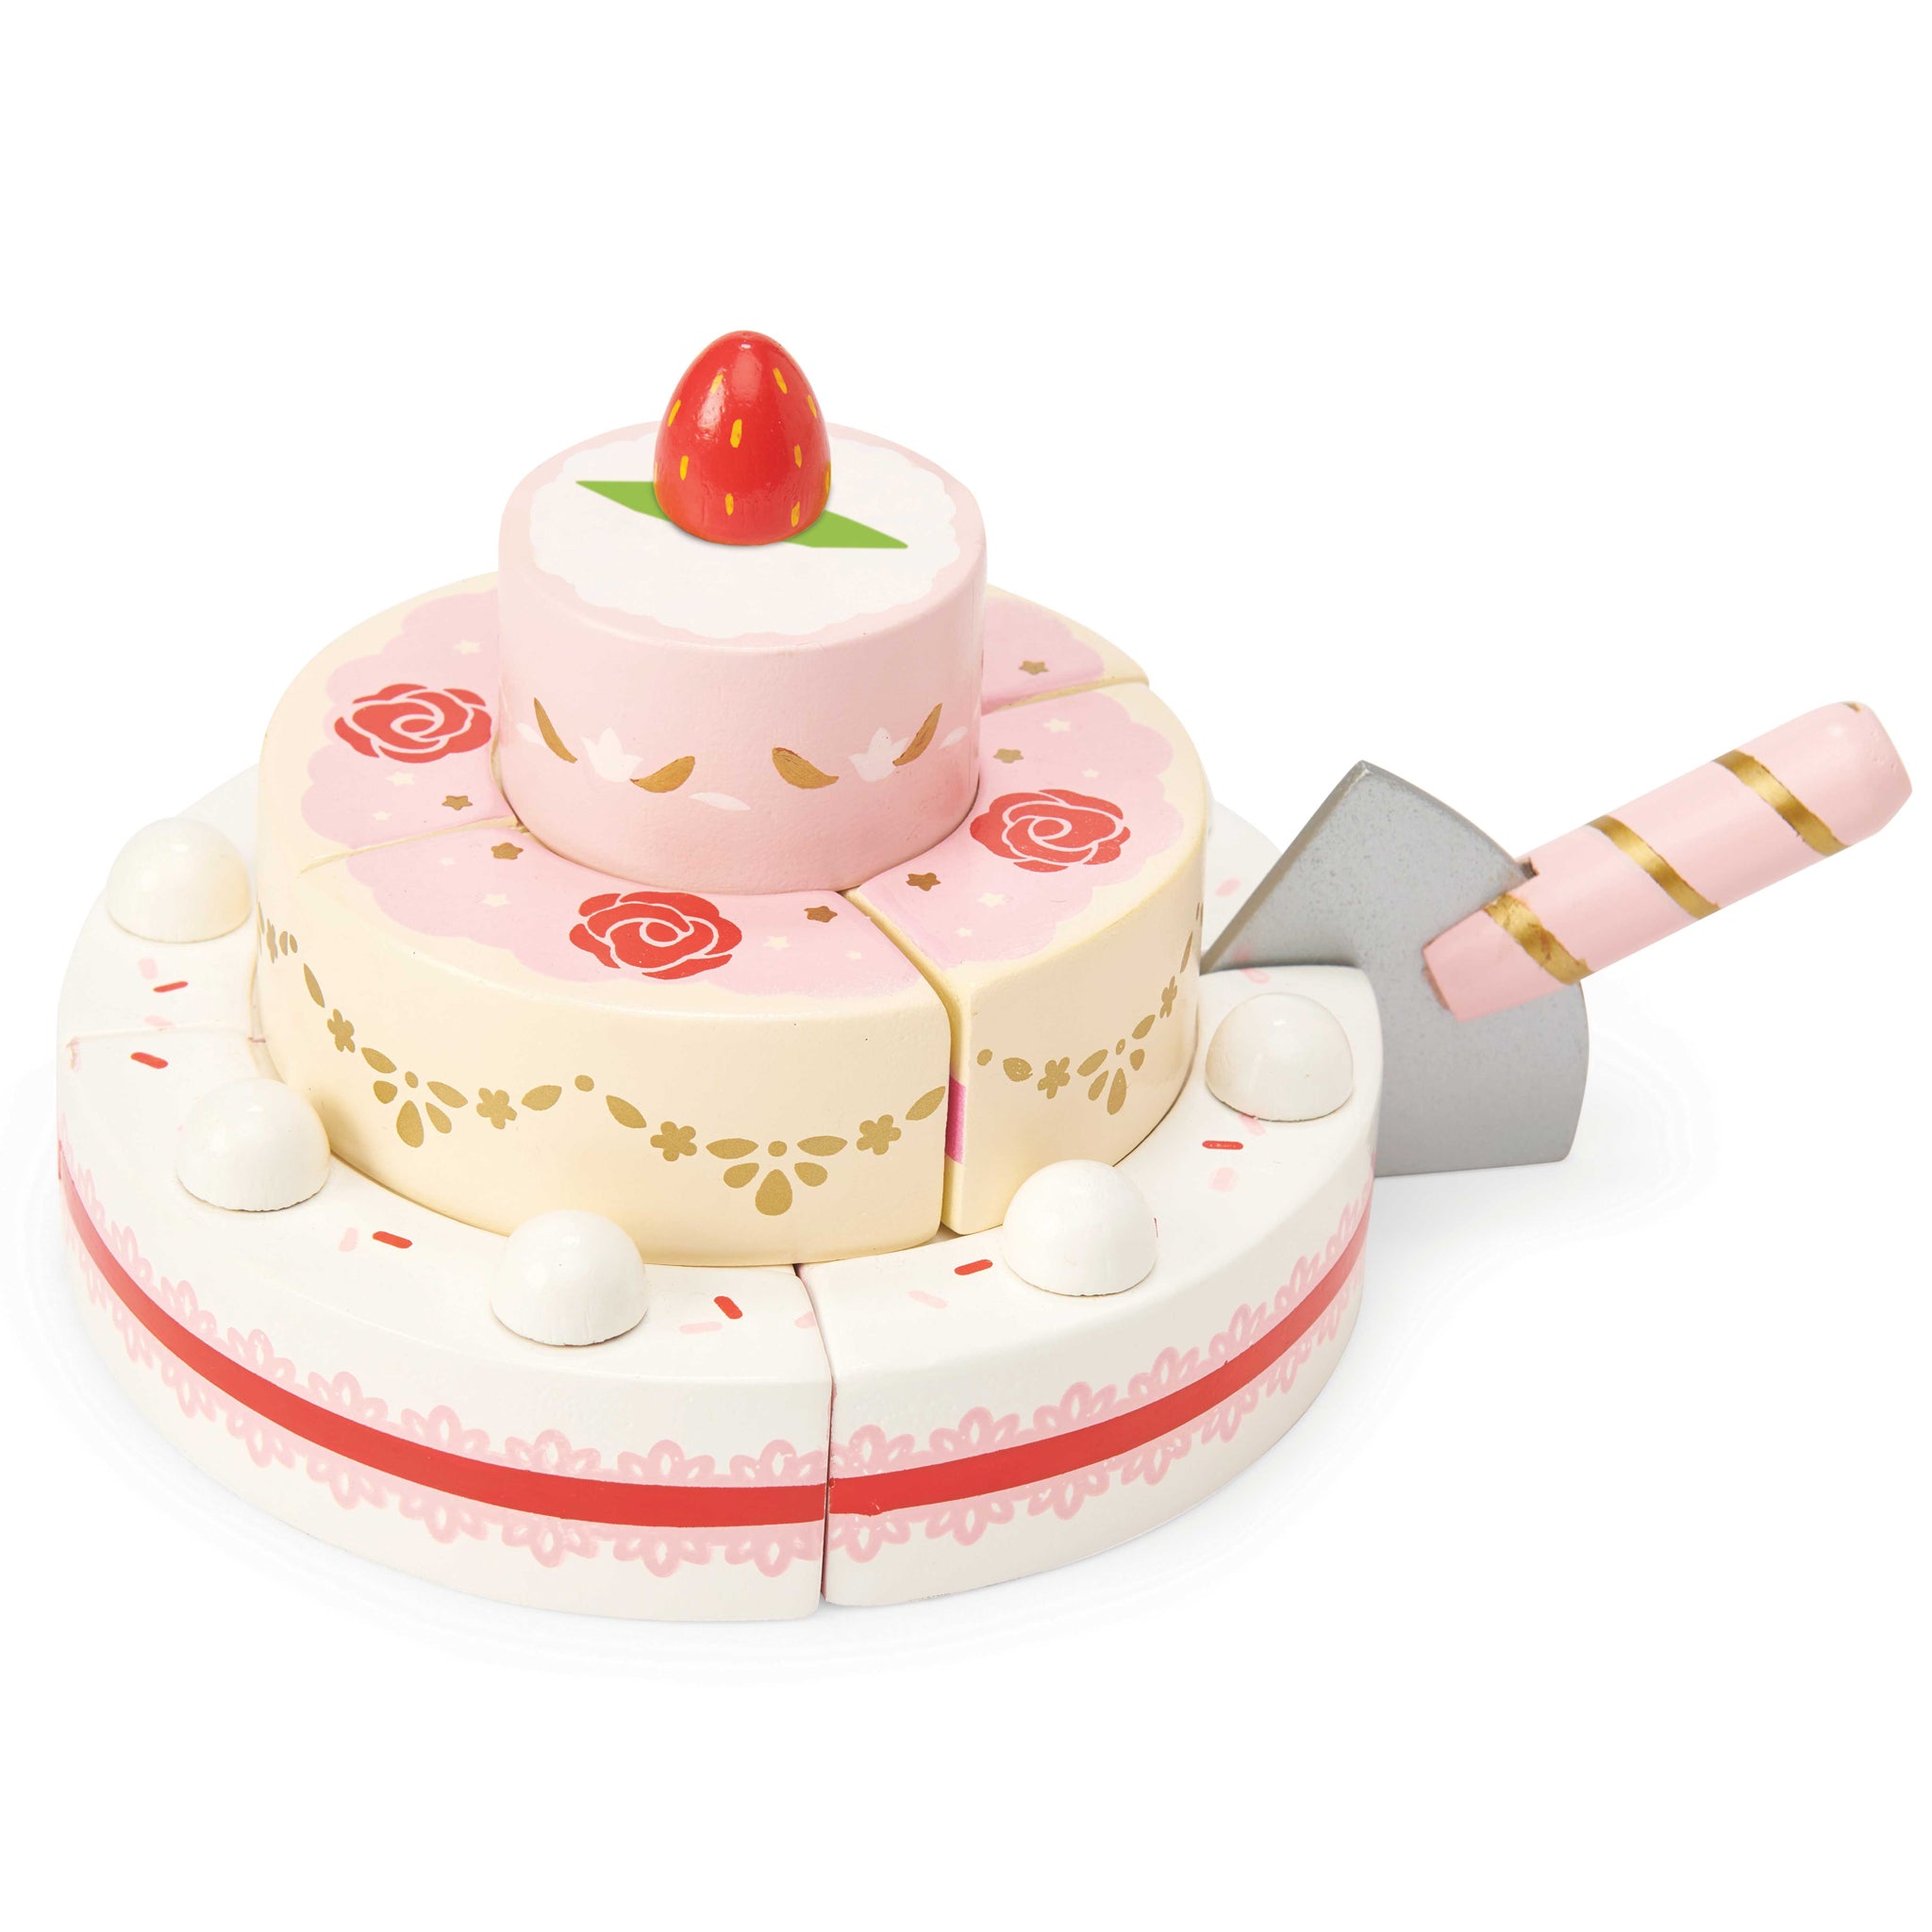 Sliceable Wedding Cake for Pretend Play